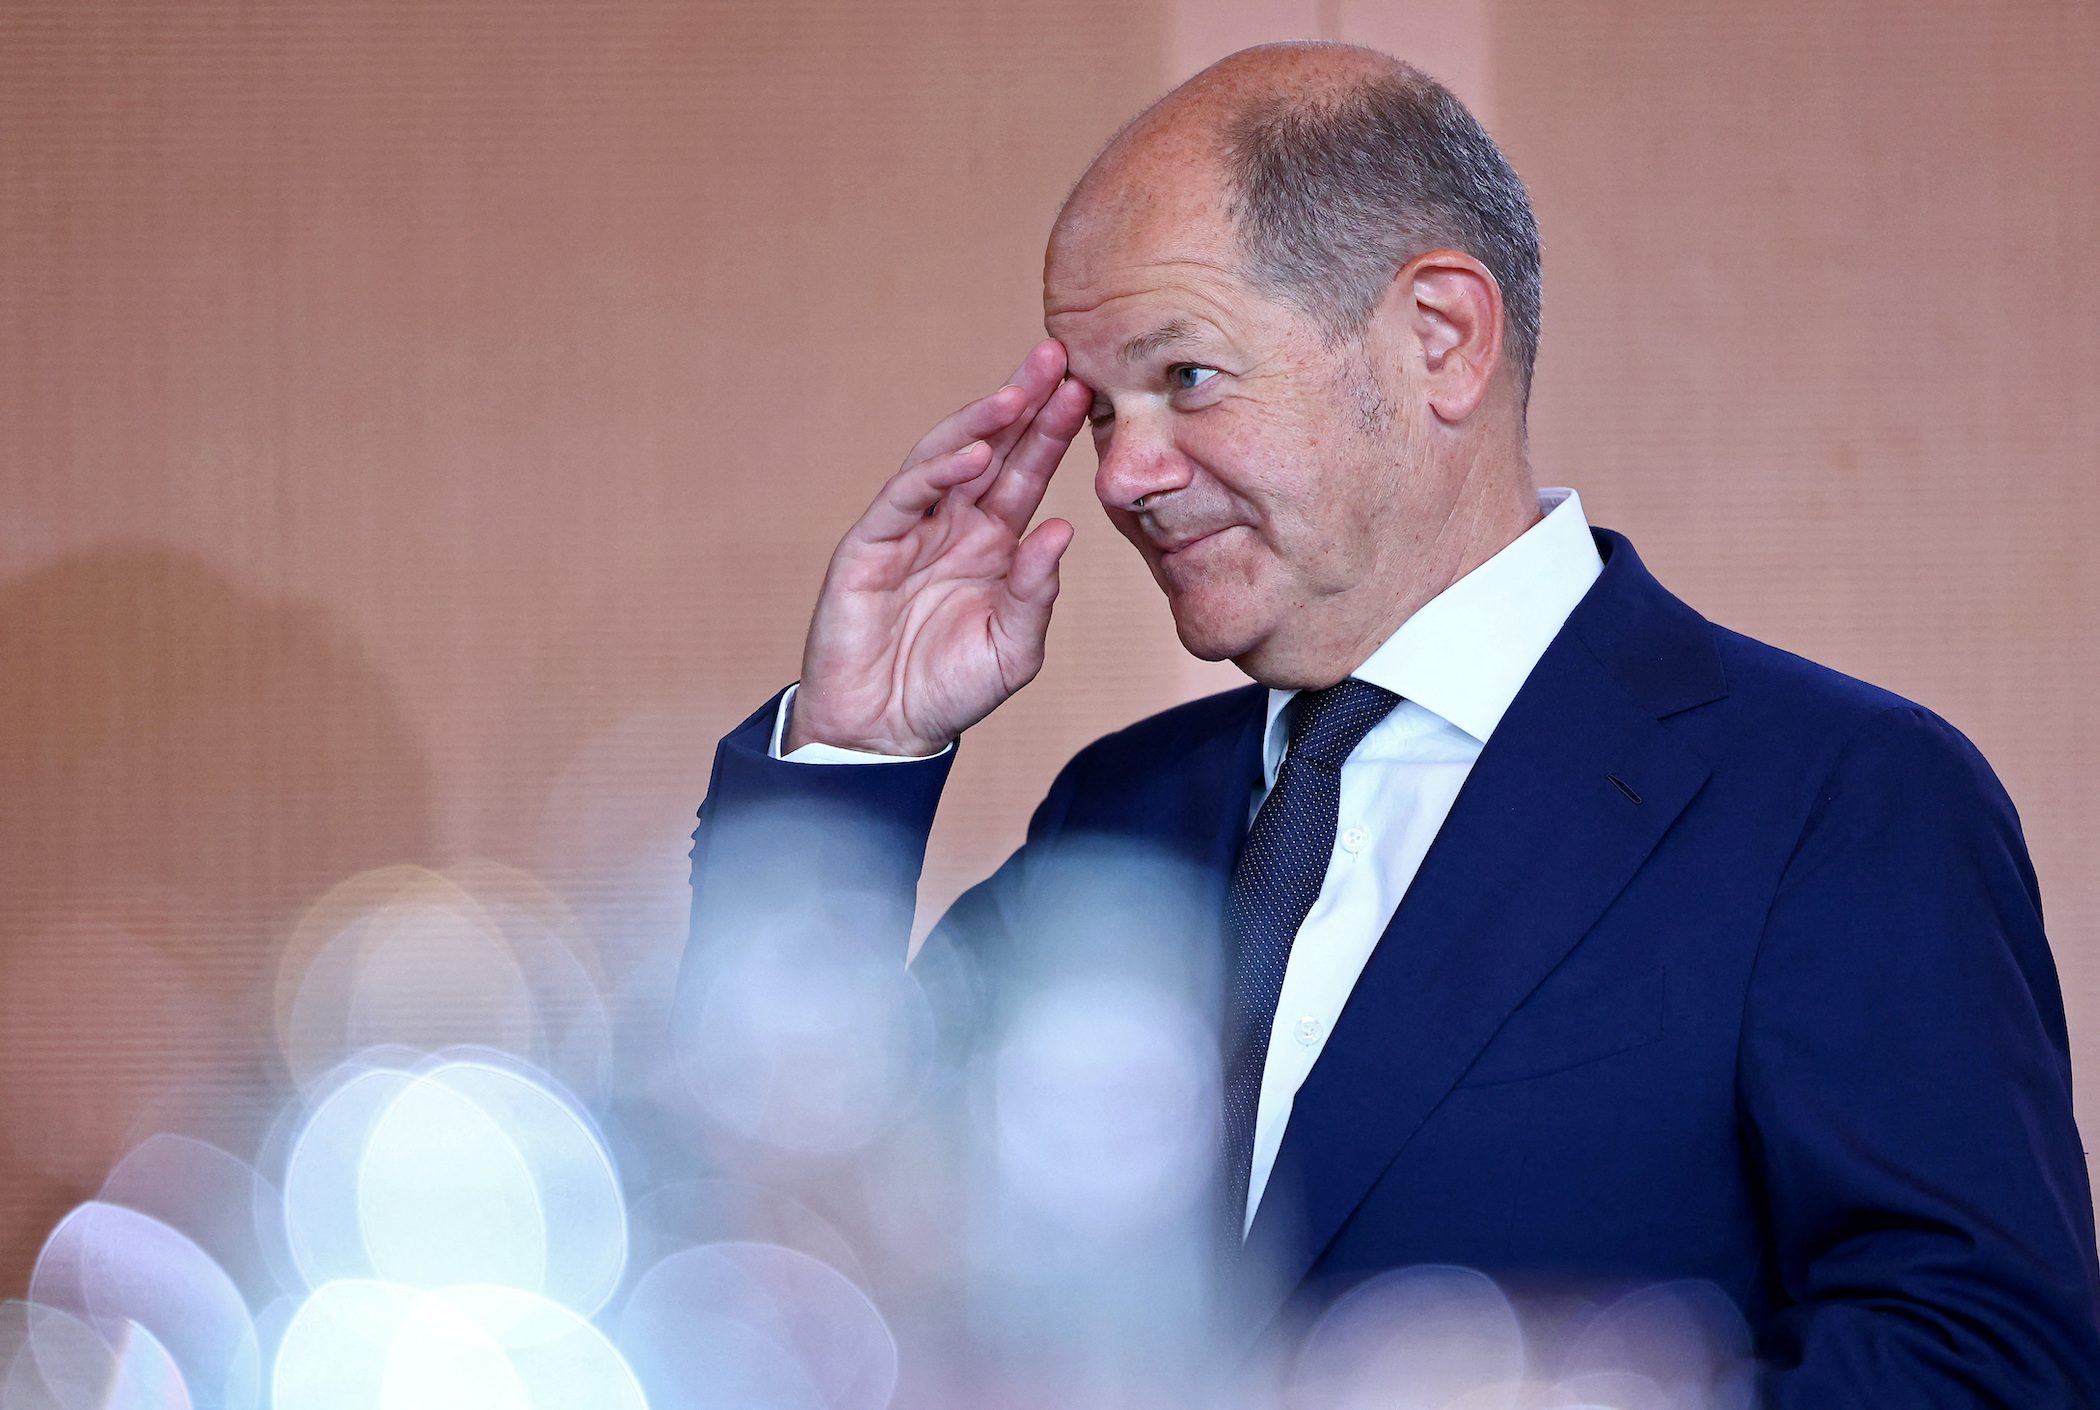 100 banks, 1,000 suspects: German fraud probe puts Scholz on the spot